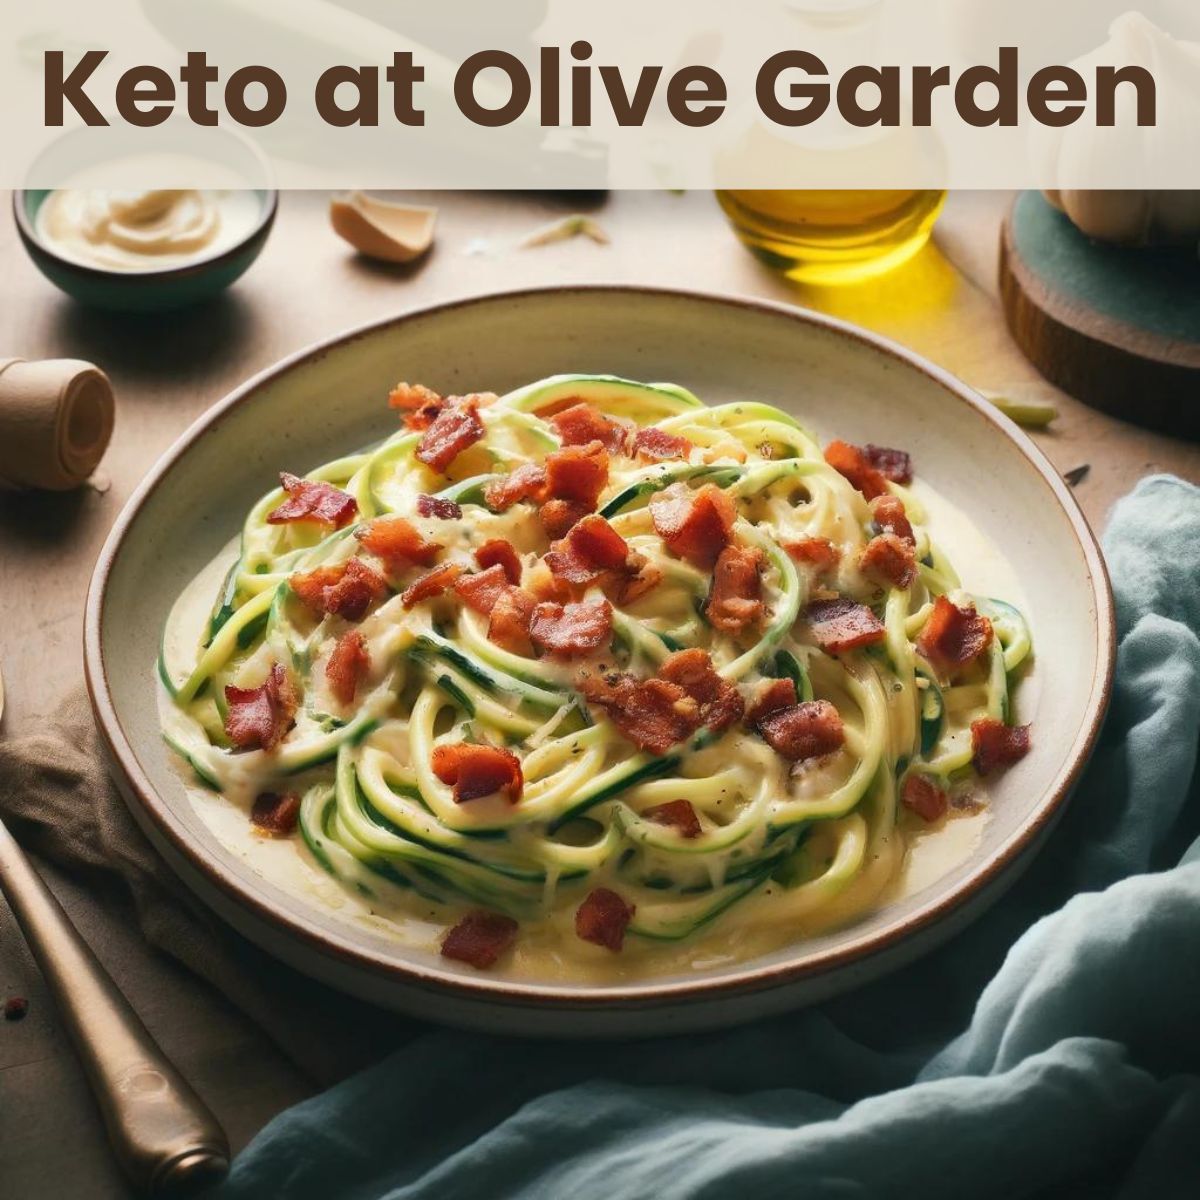 The Healthiest Keto Meals at Olive Garden